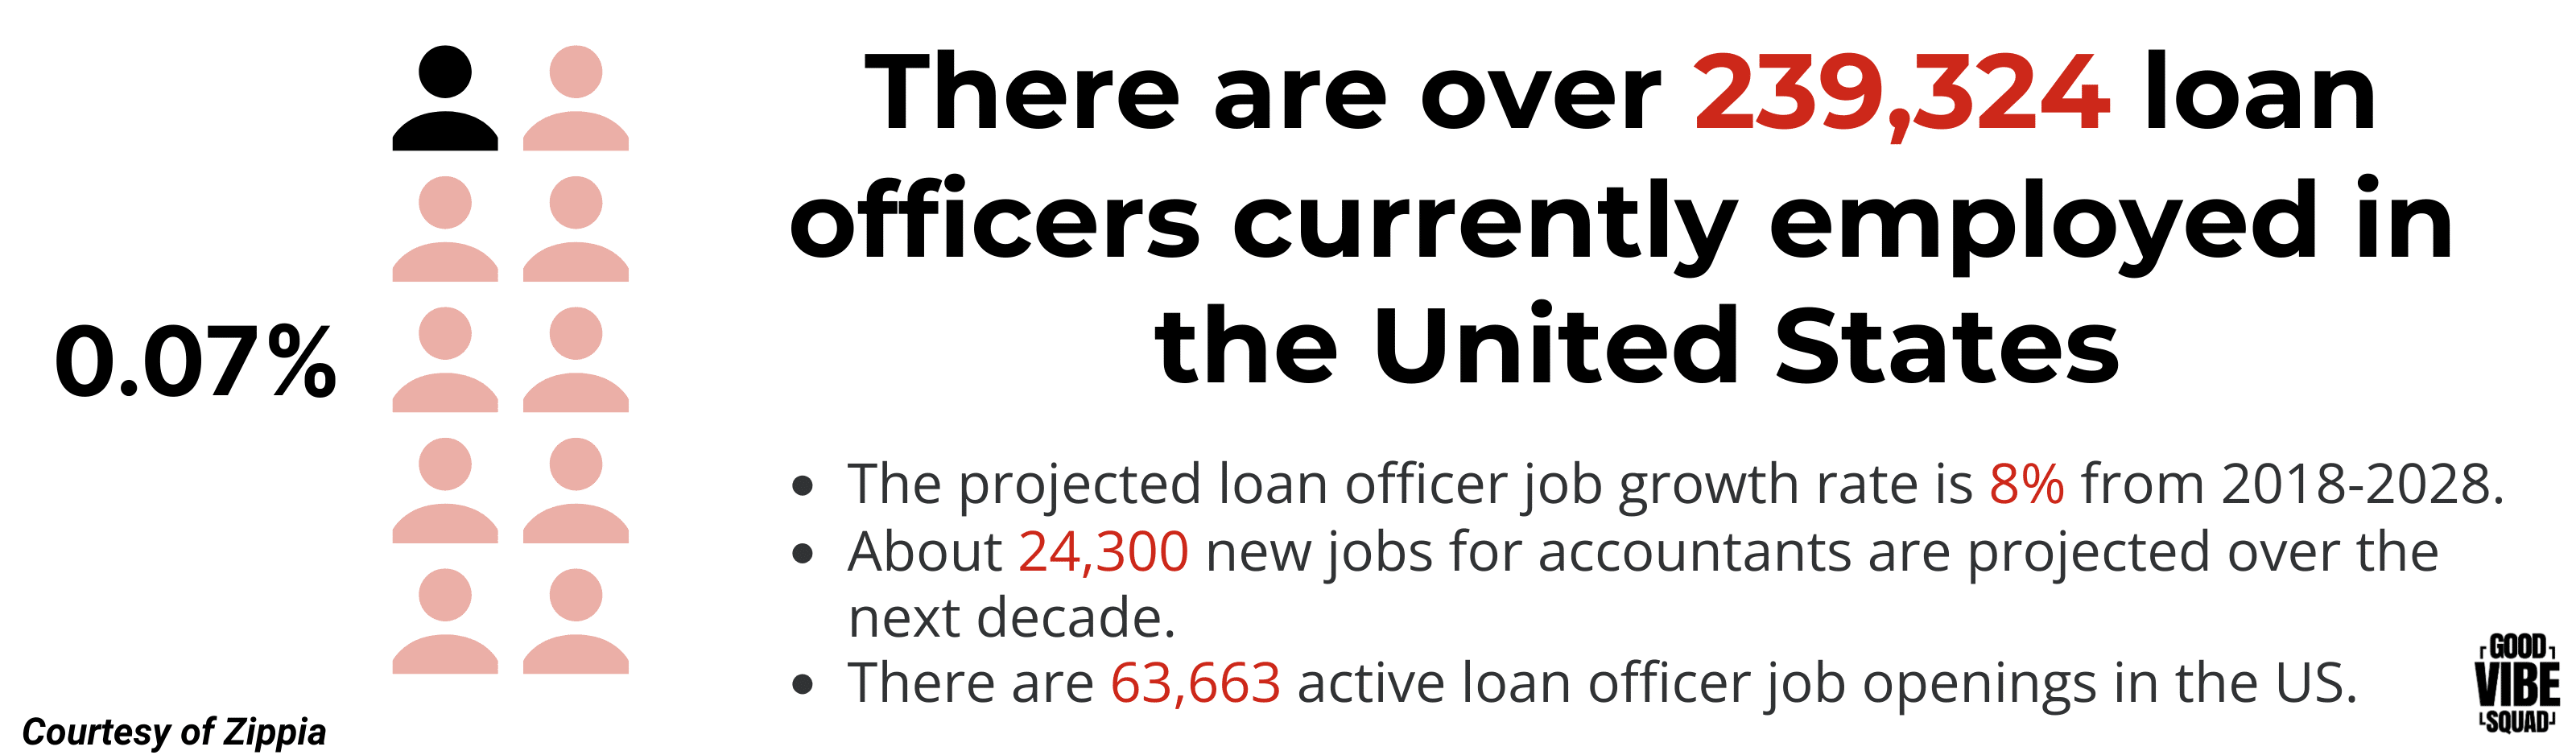 a graphic explaining that there are over 239,324 loan officers in the US, the projected loan officer growth rate is 8% for 2018-2028, and there are over 63,000 available job openings for loan officers